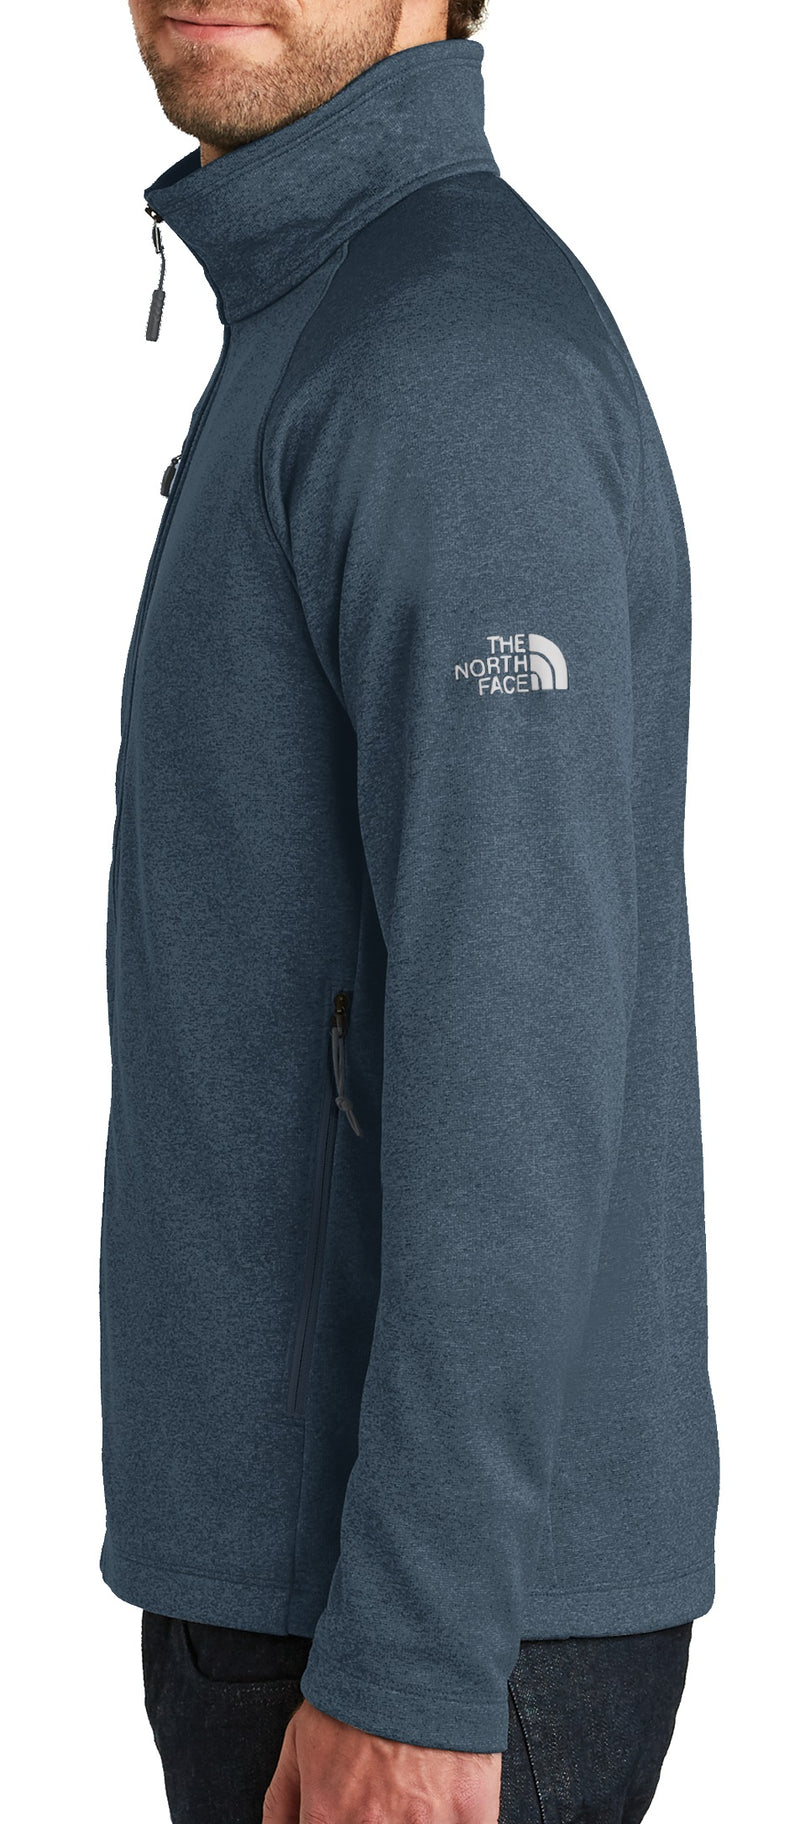 The North Face [NF0A3LH9] Canyon Flats Fleece Jacket. Live Chat For Bulk Discounts.